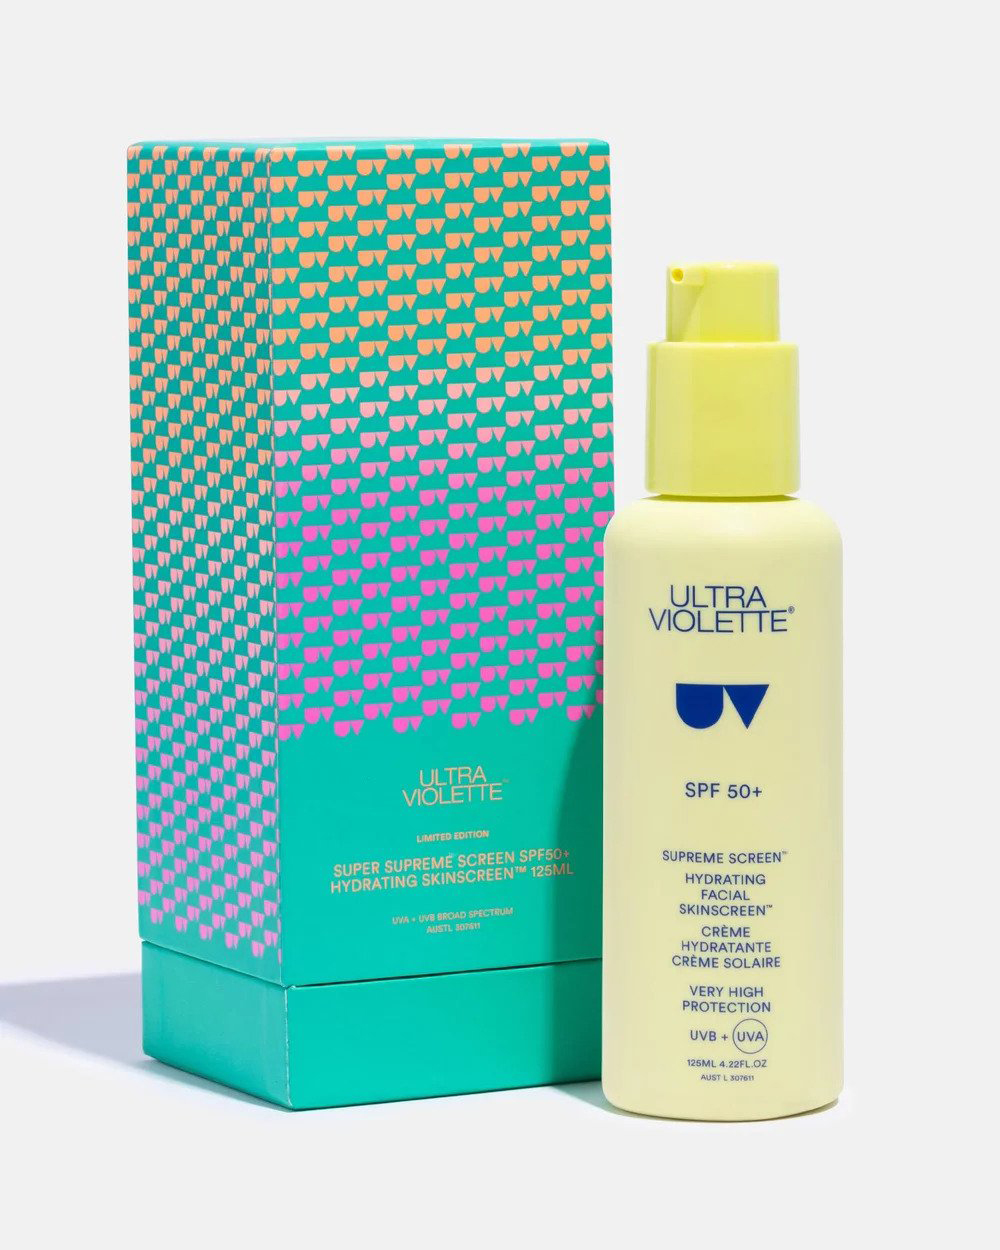 A tall green patterned box with a bright yellow pump bottle of Ultra Violette sunscreen.